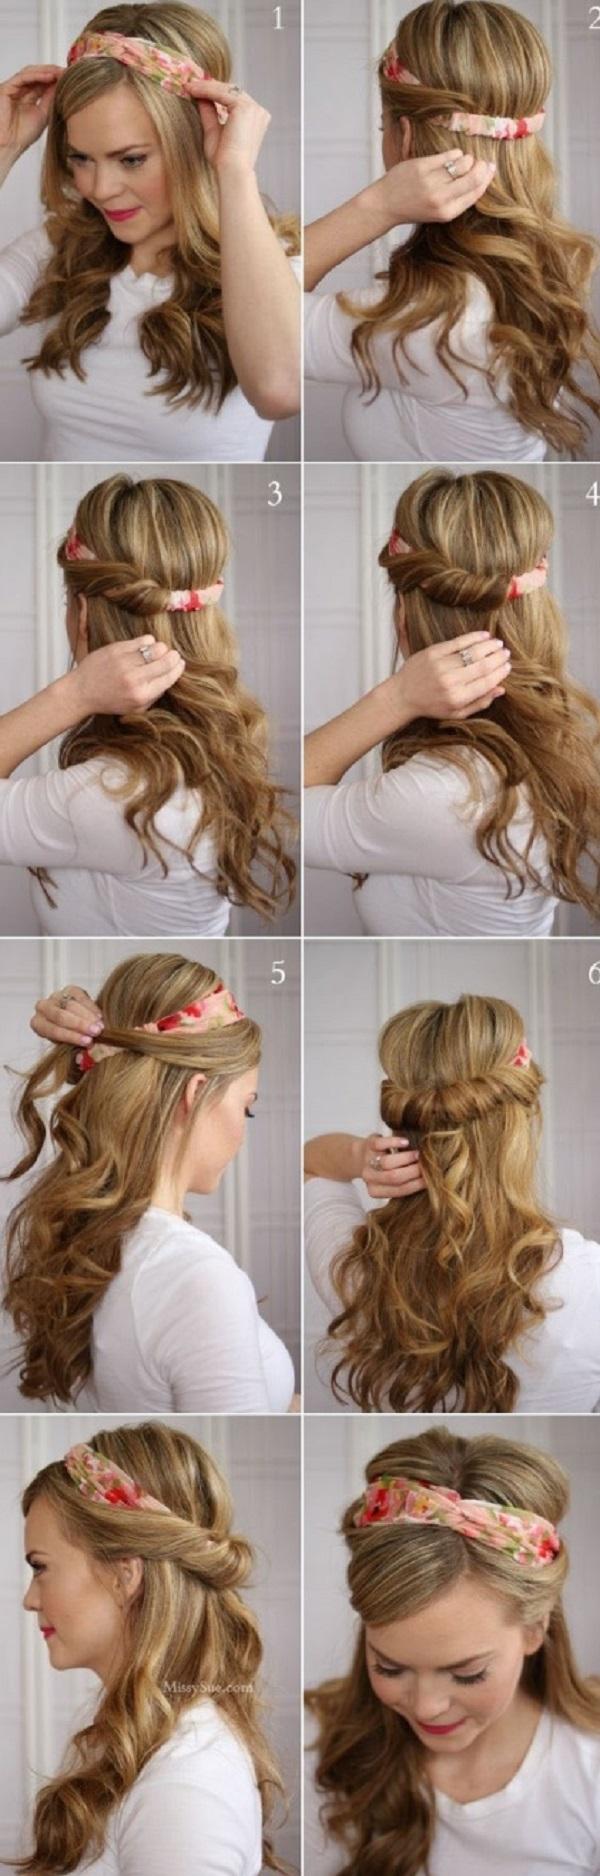 25 Easy Hairstyles For Long Hair Cuded